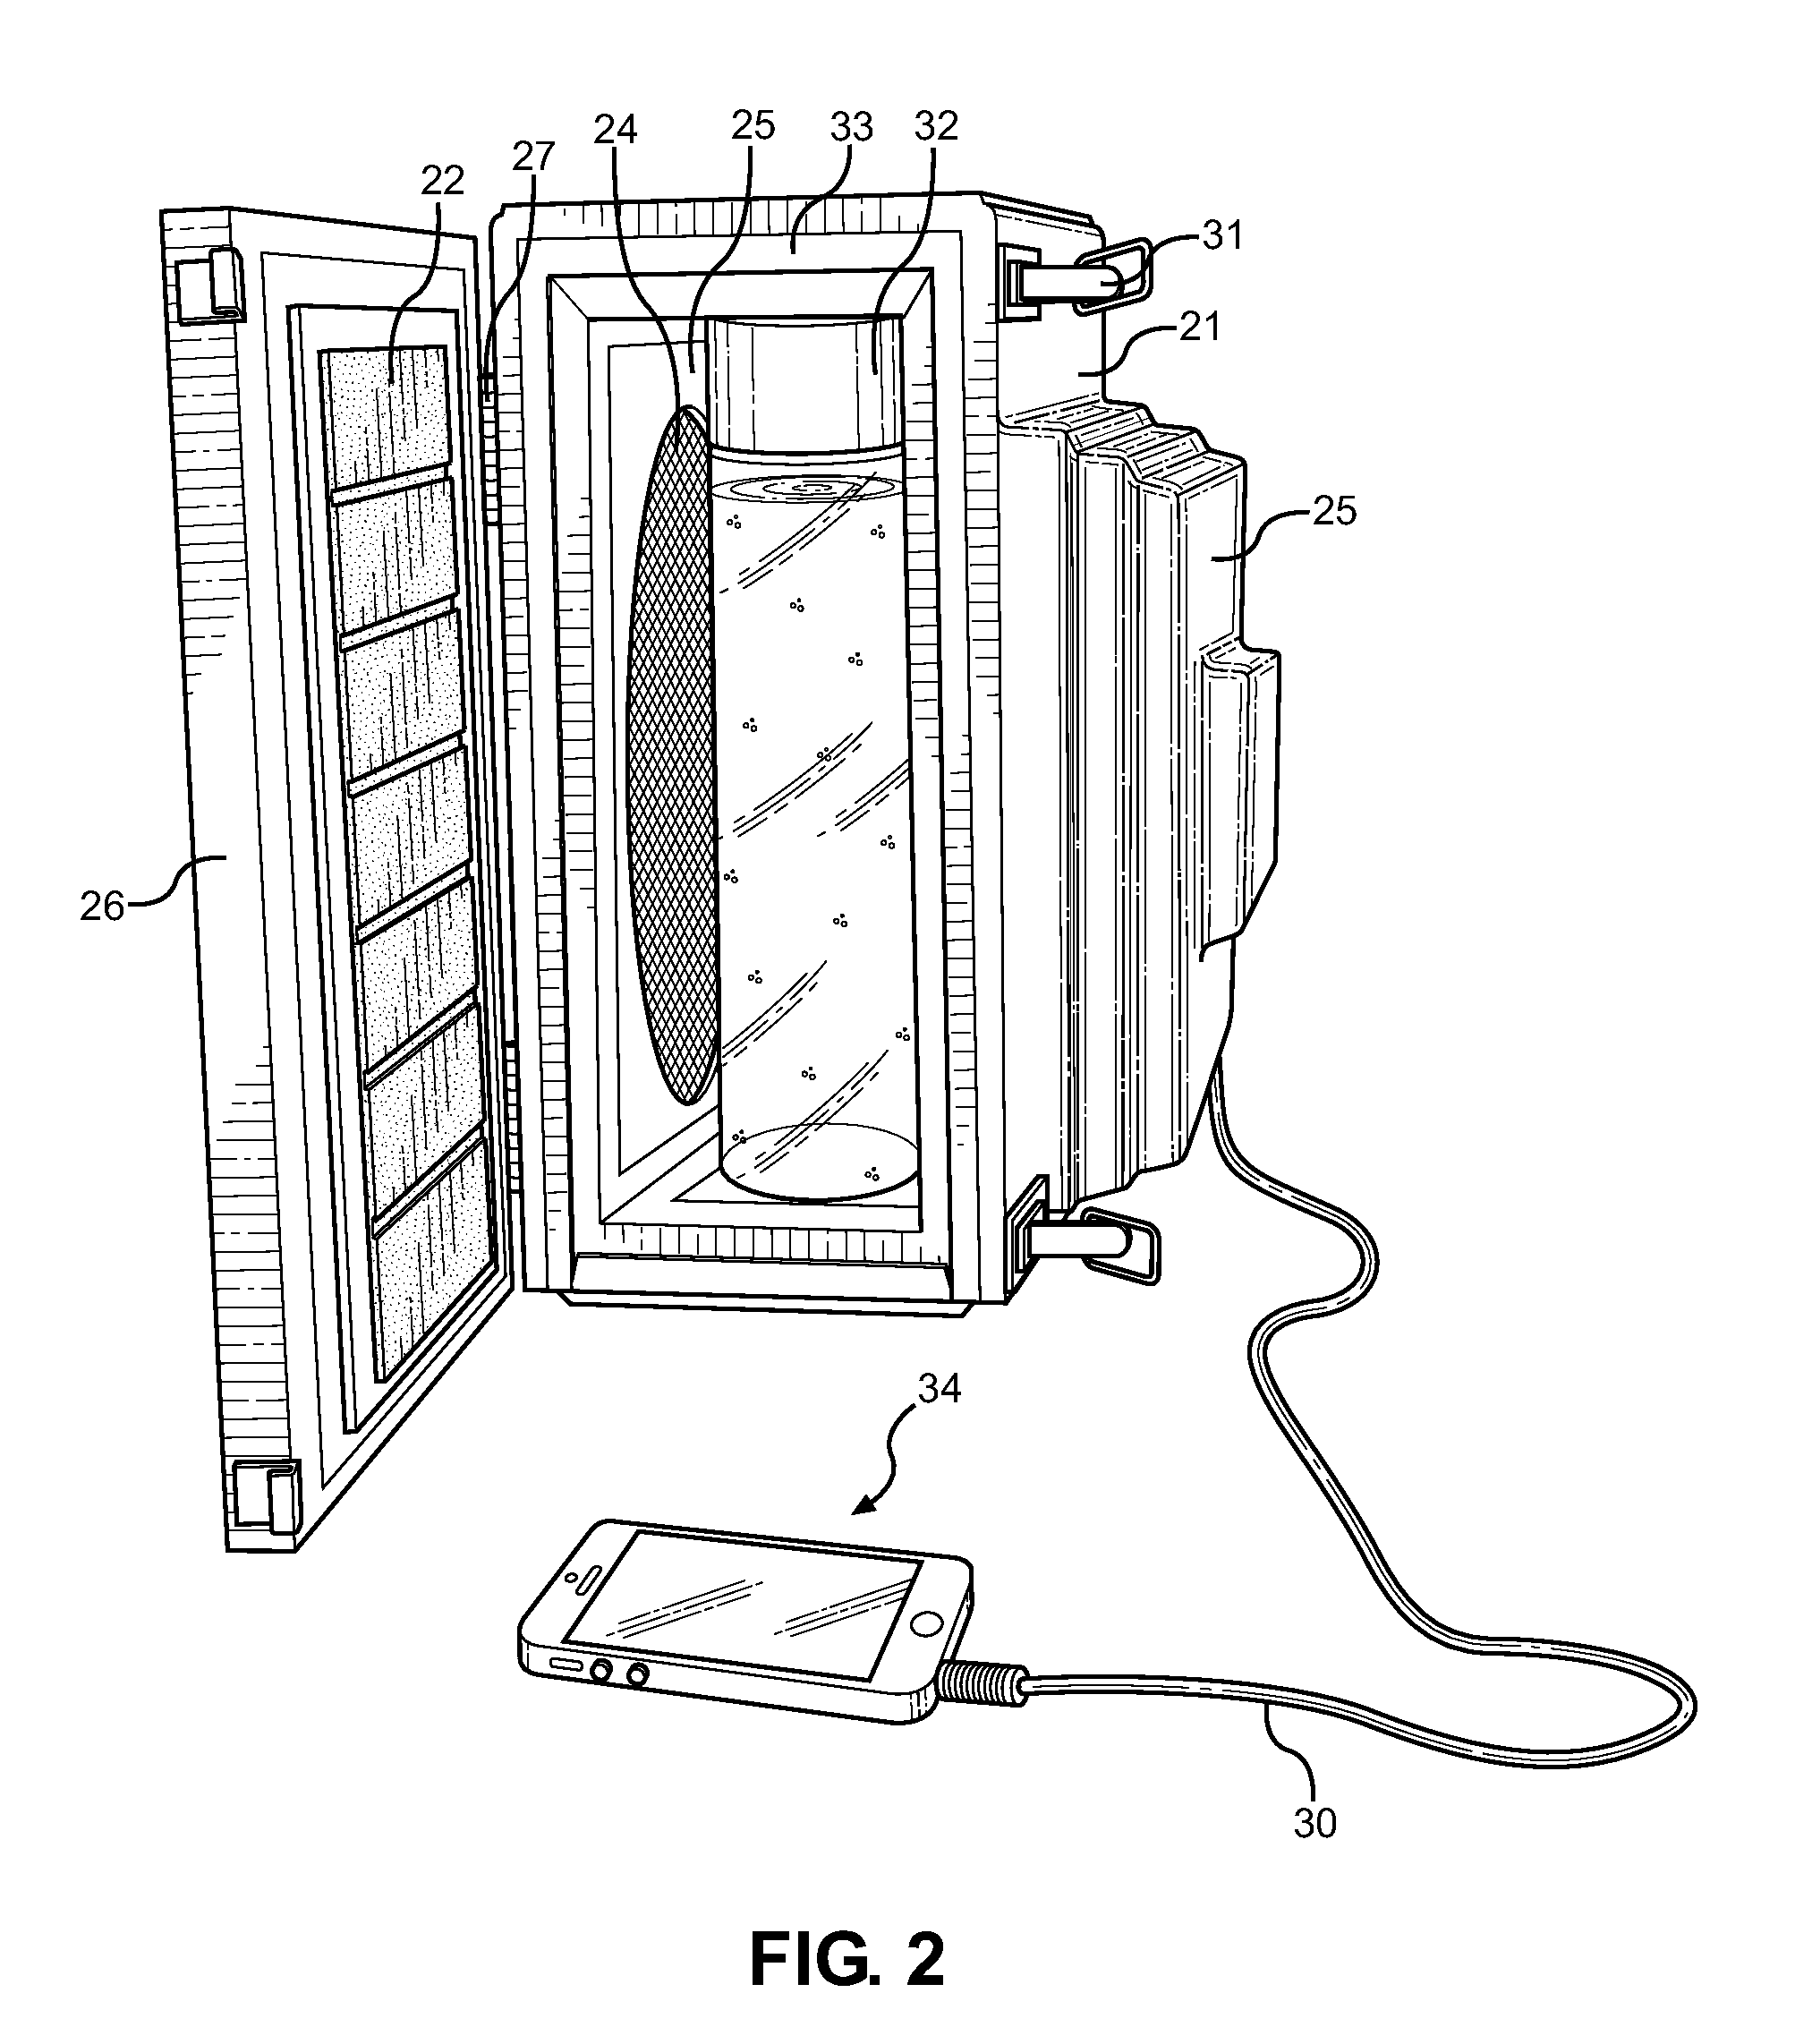 Audio Device for Altering Water Structure